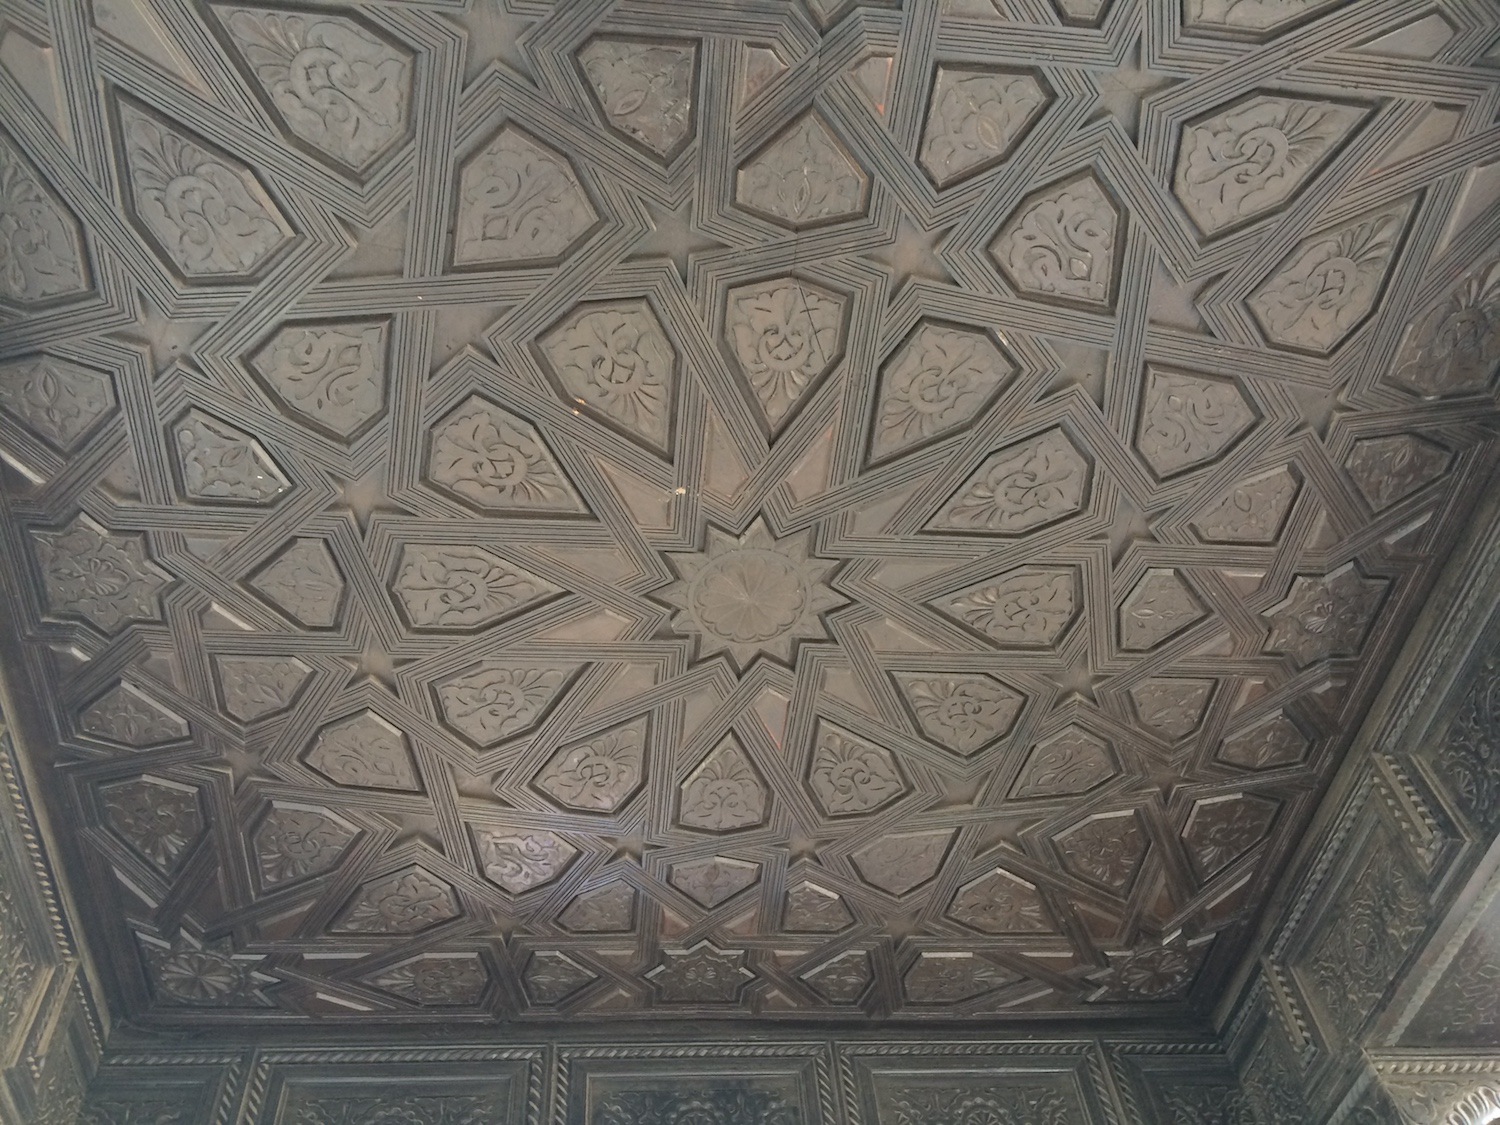 Detail view of the geometric pattern carved into the ceiling